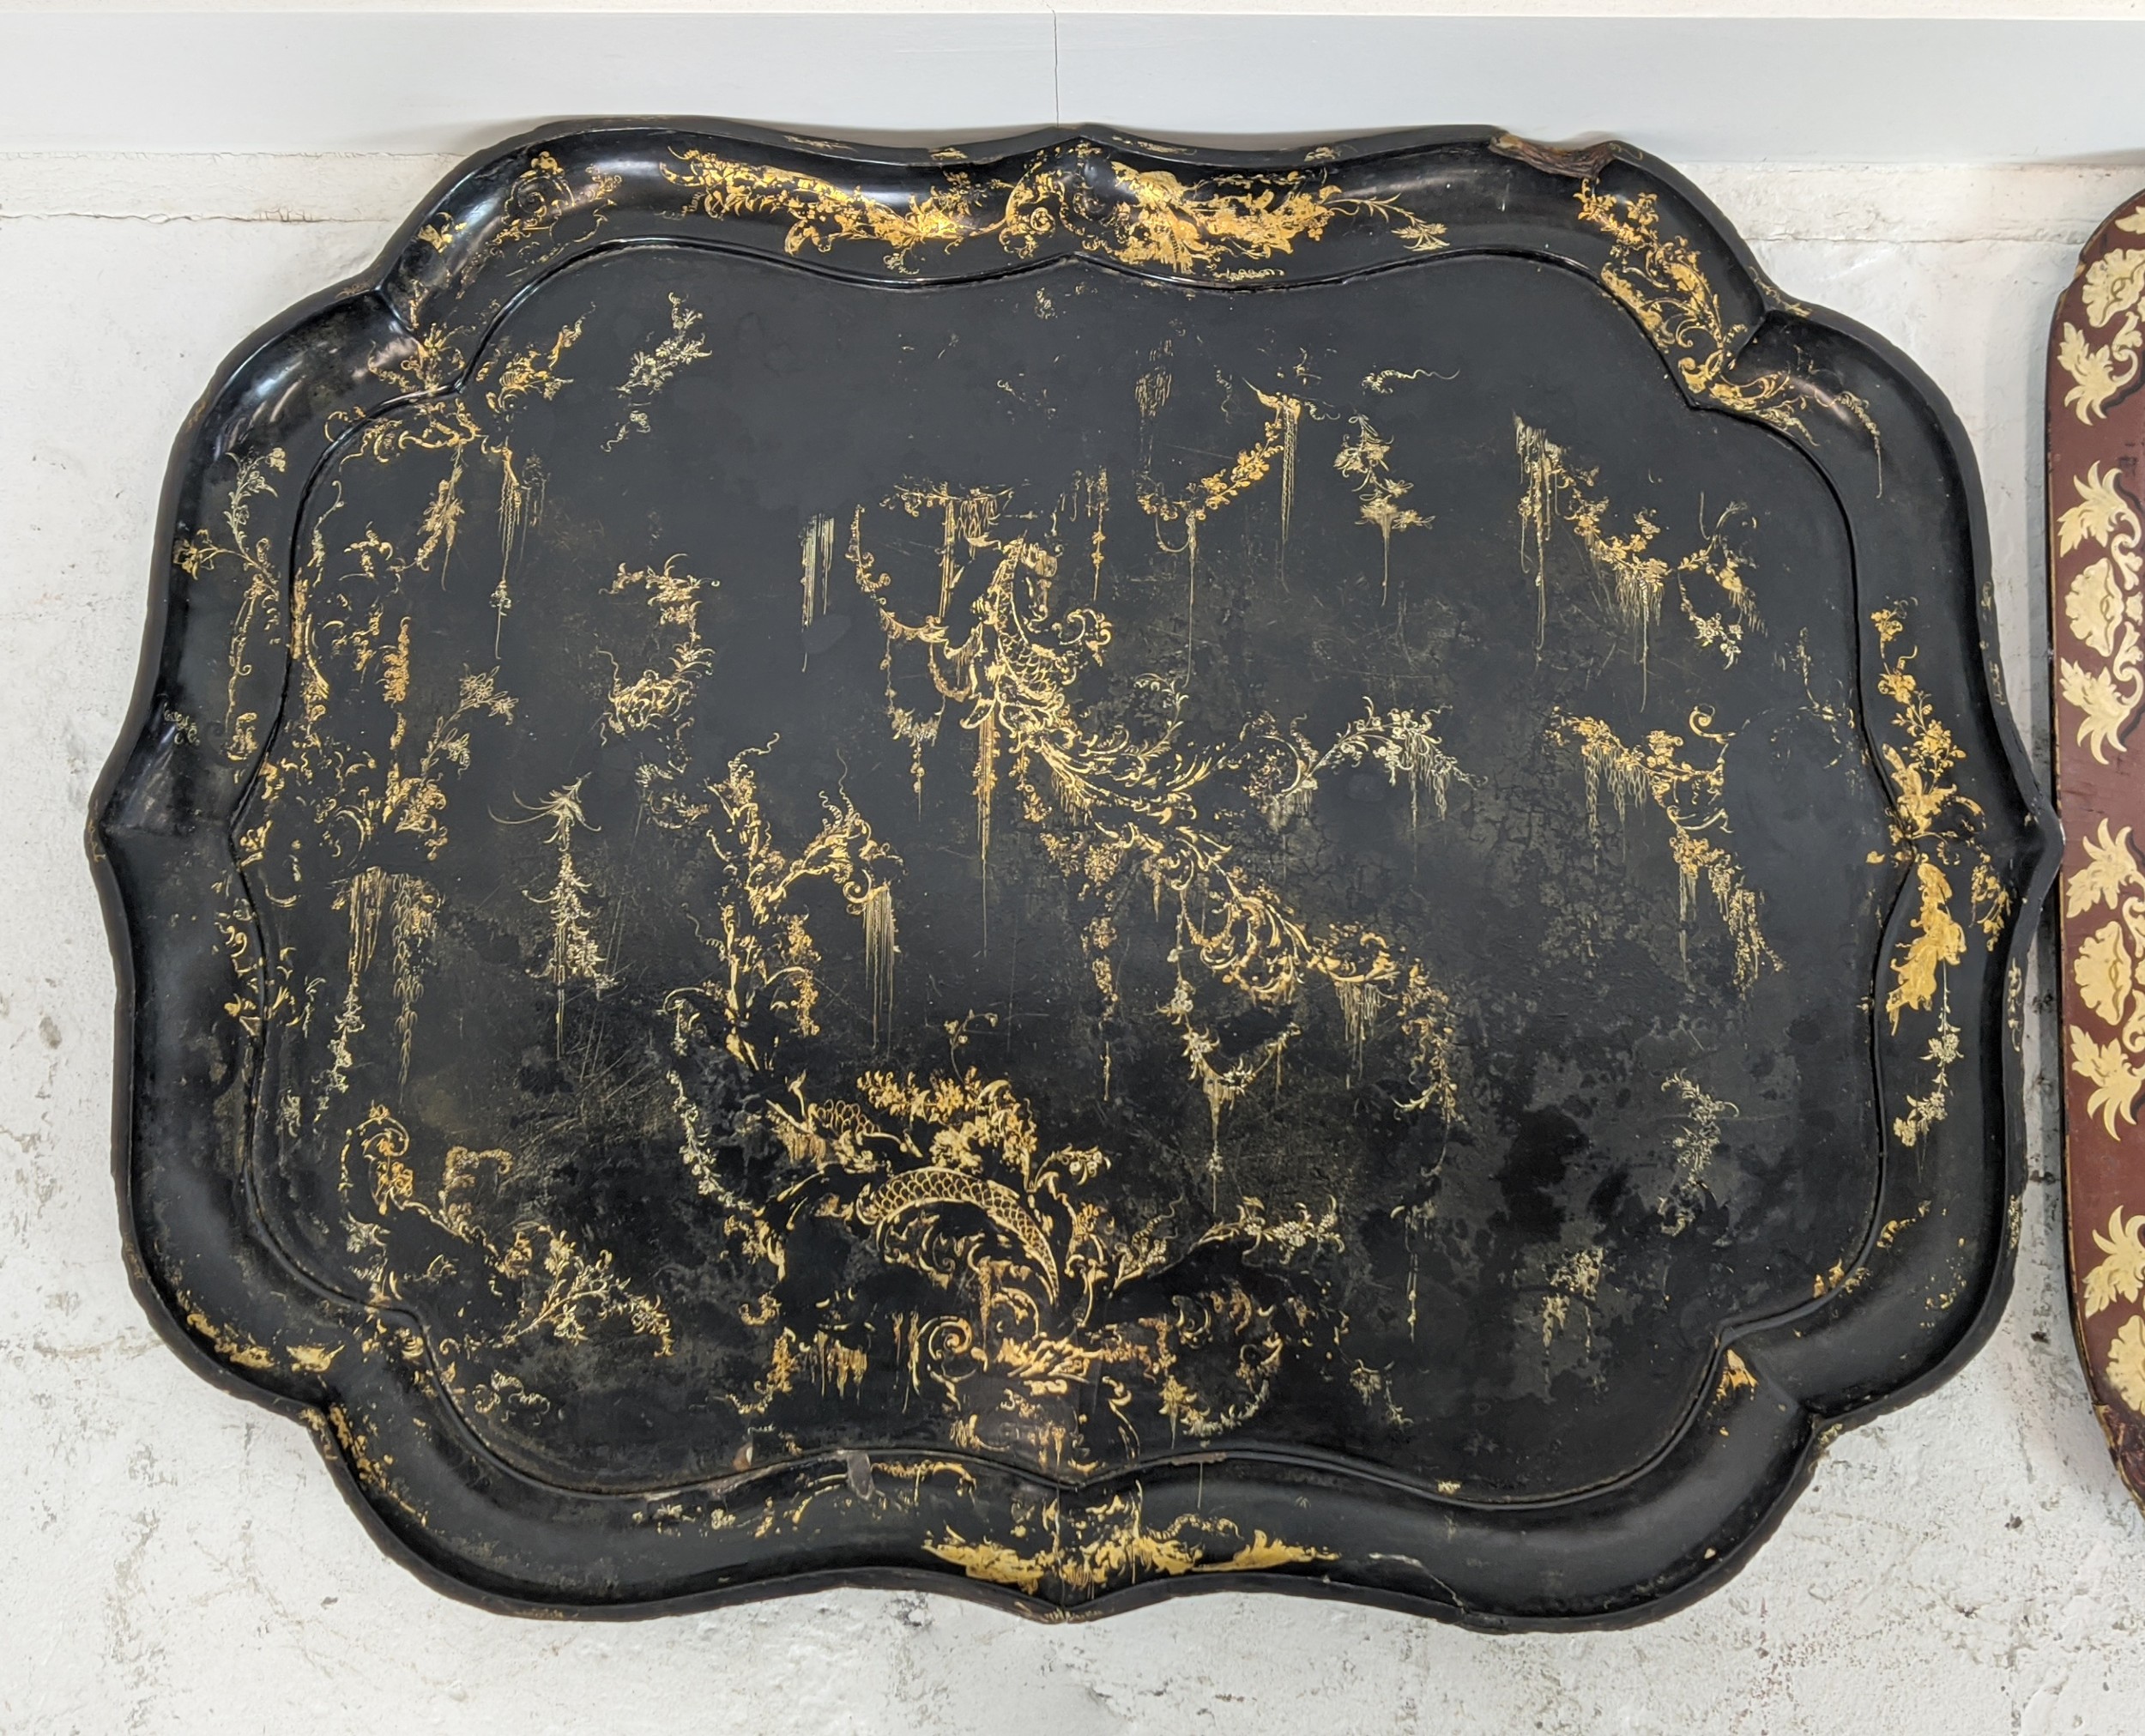 TRAY, Regency papier mache with scalloped border stamped Clay, 'King Street', Covent Garden, 80cm - Image 3 of 12